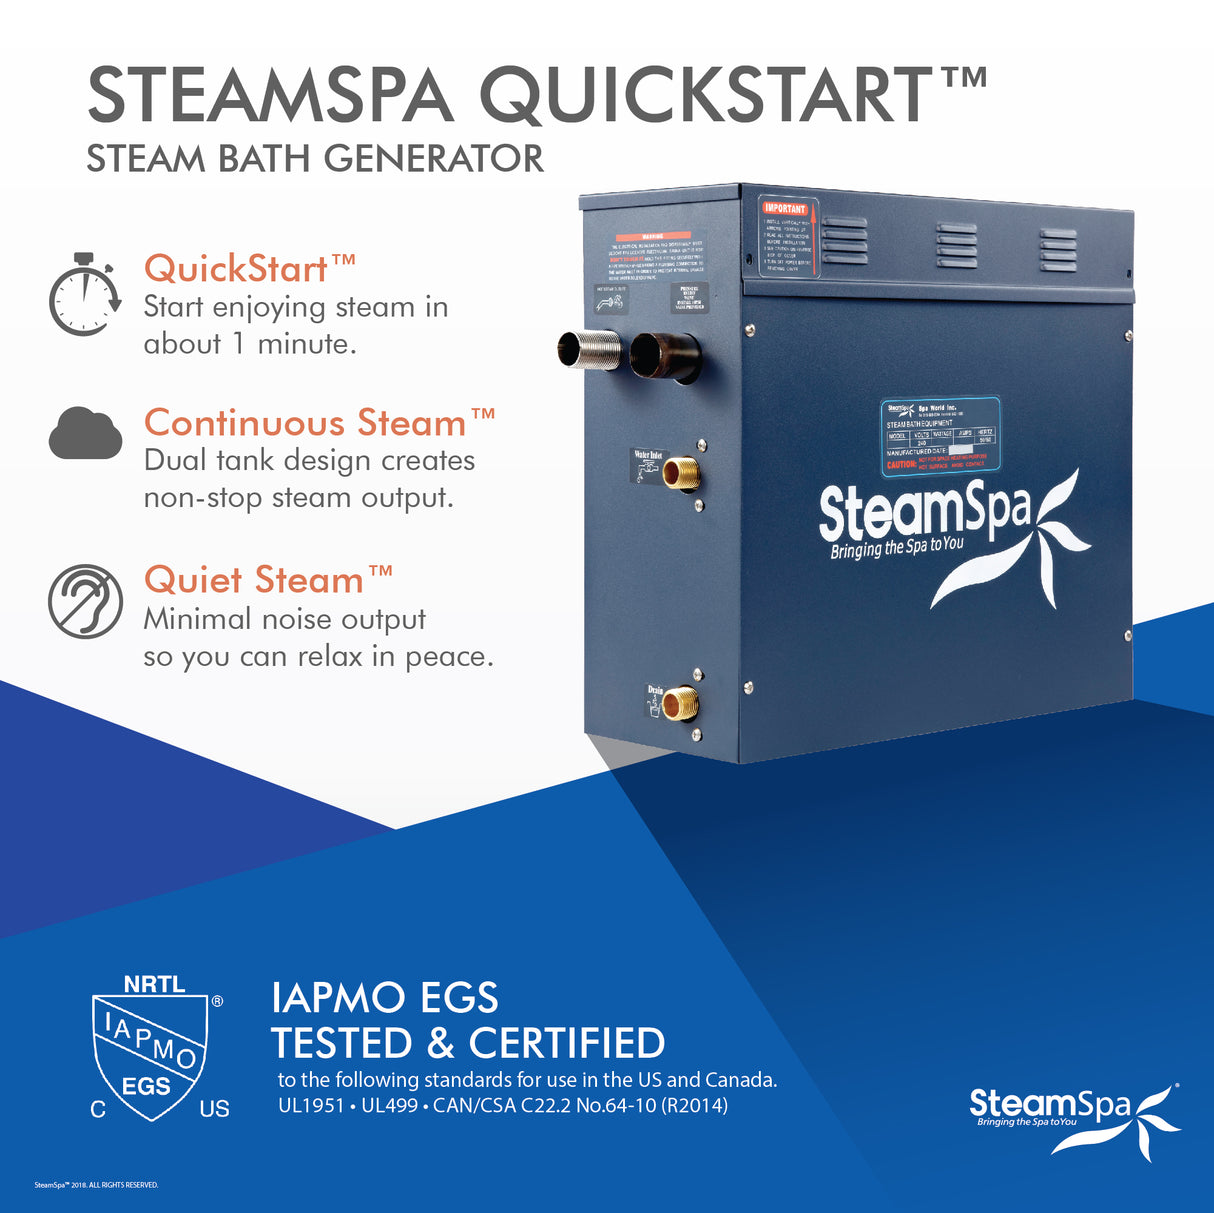 SteamSpa Indulgence 4.5 KW QuickStart Acu-Steam Bath Generator Package with Built-in Auto Drain in Polished Chrome IN450CH-A